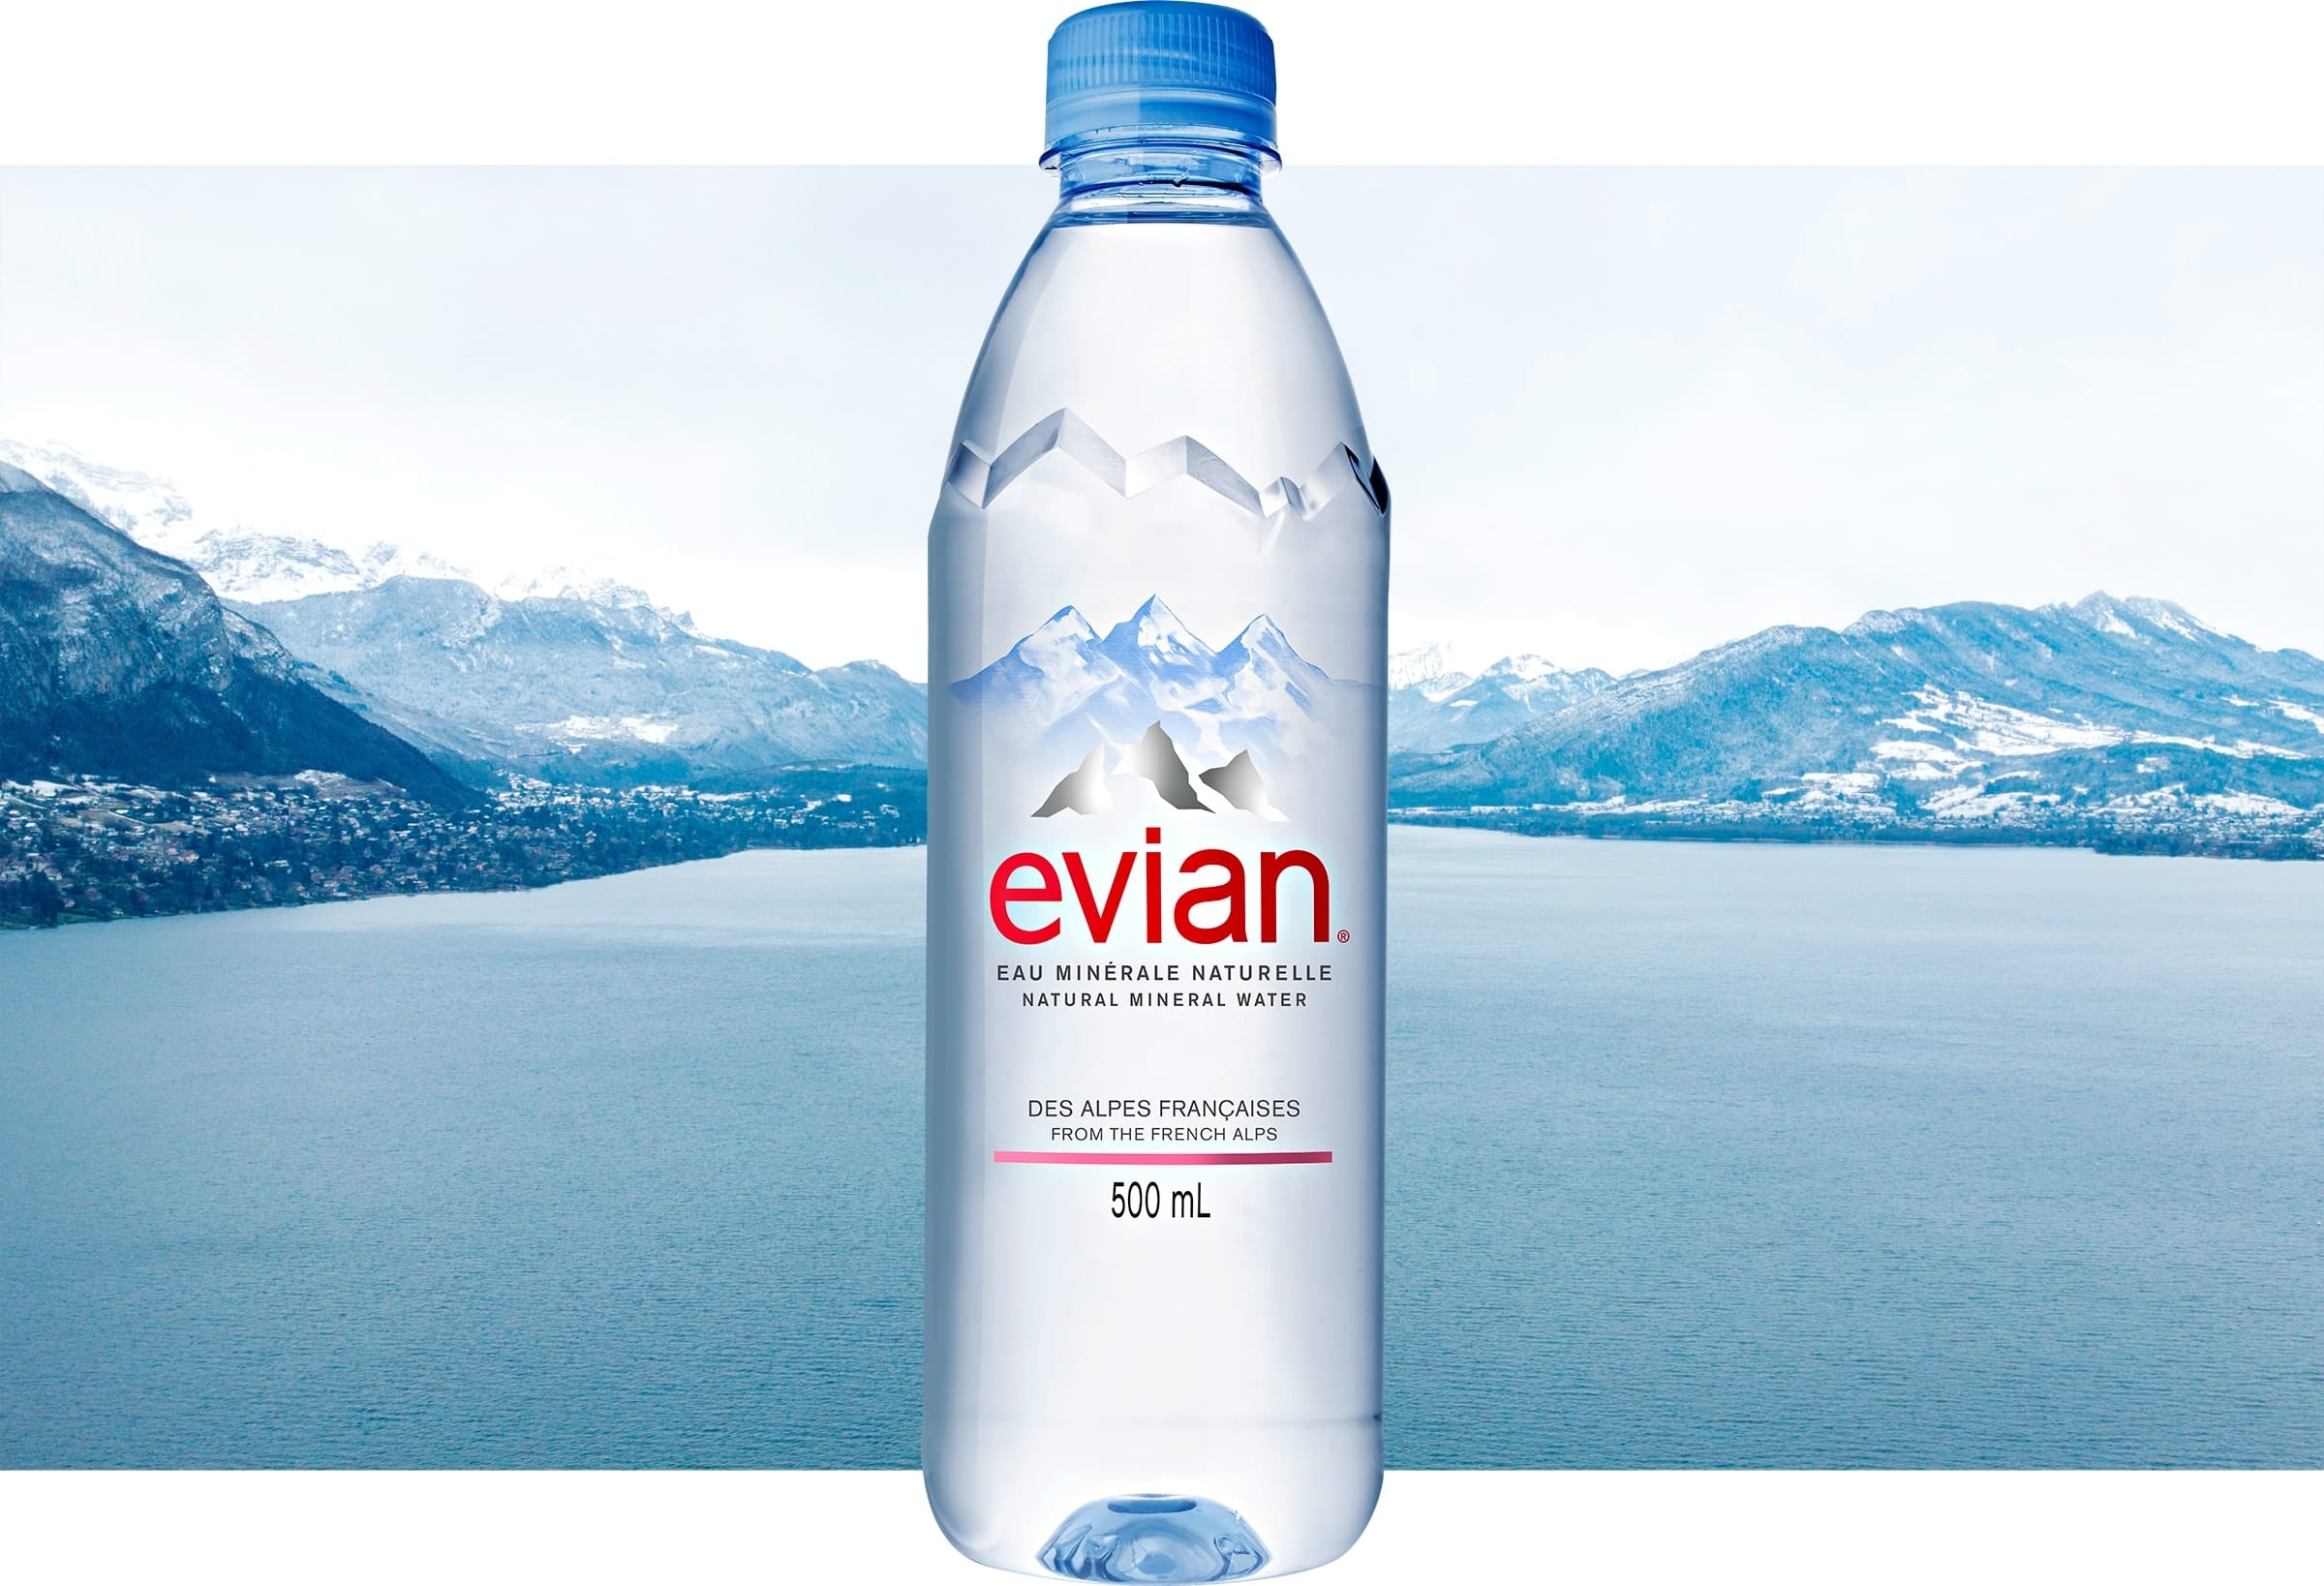 LPGA's Major Made From Water -- The Evian